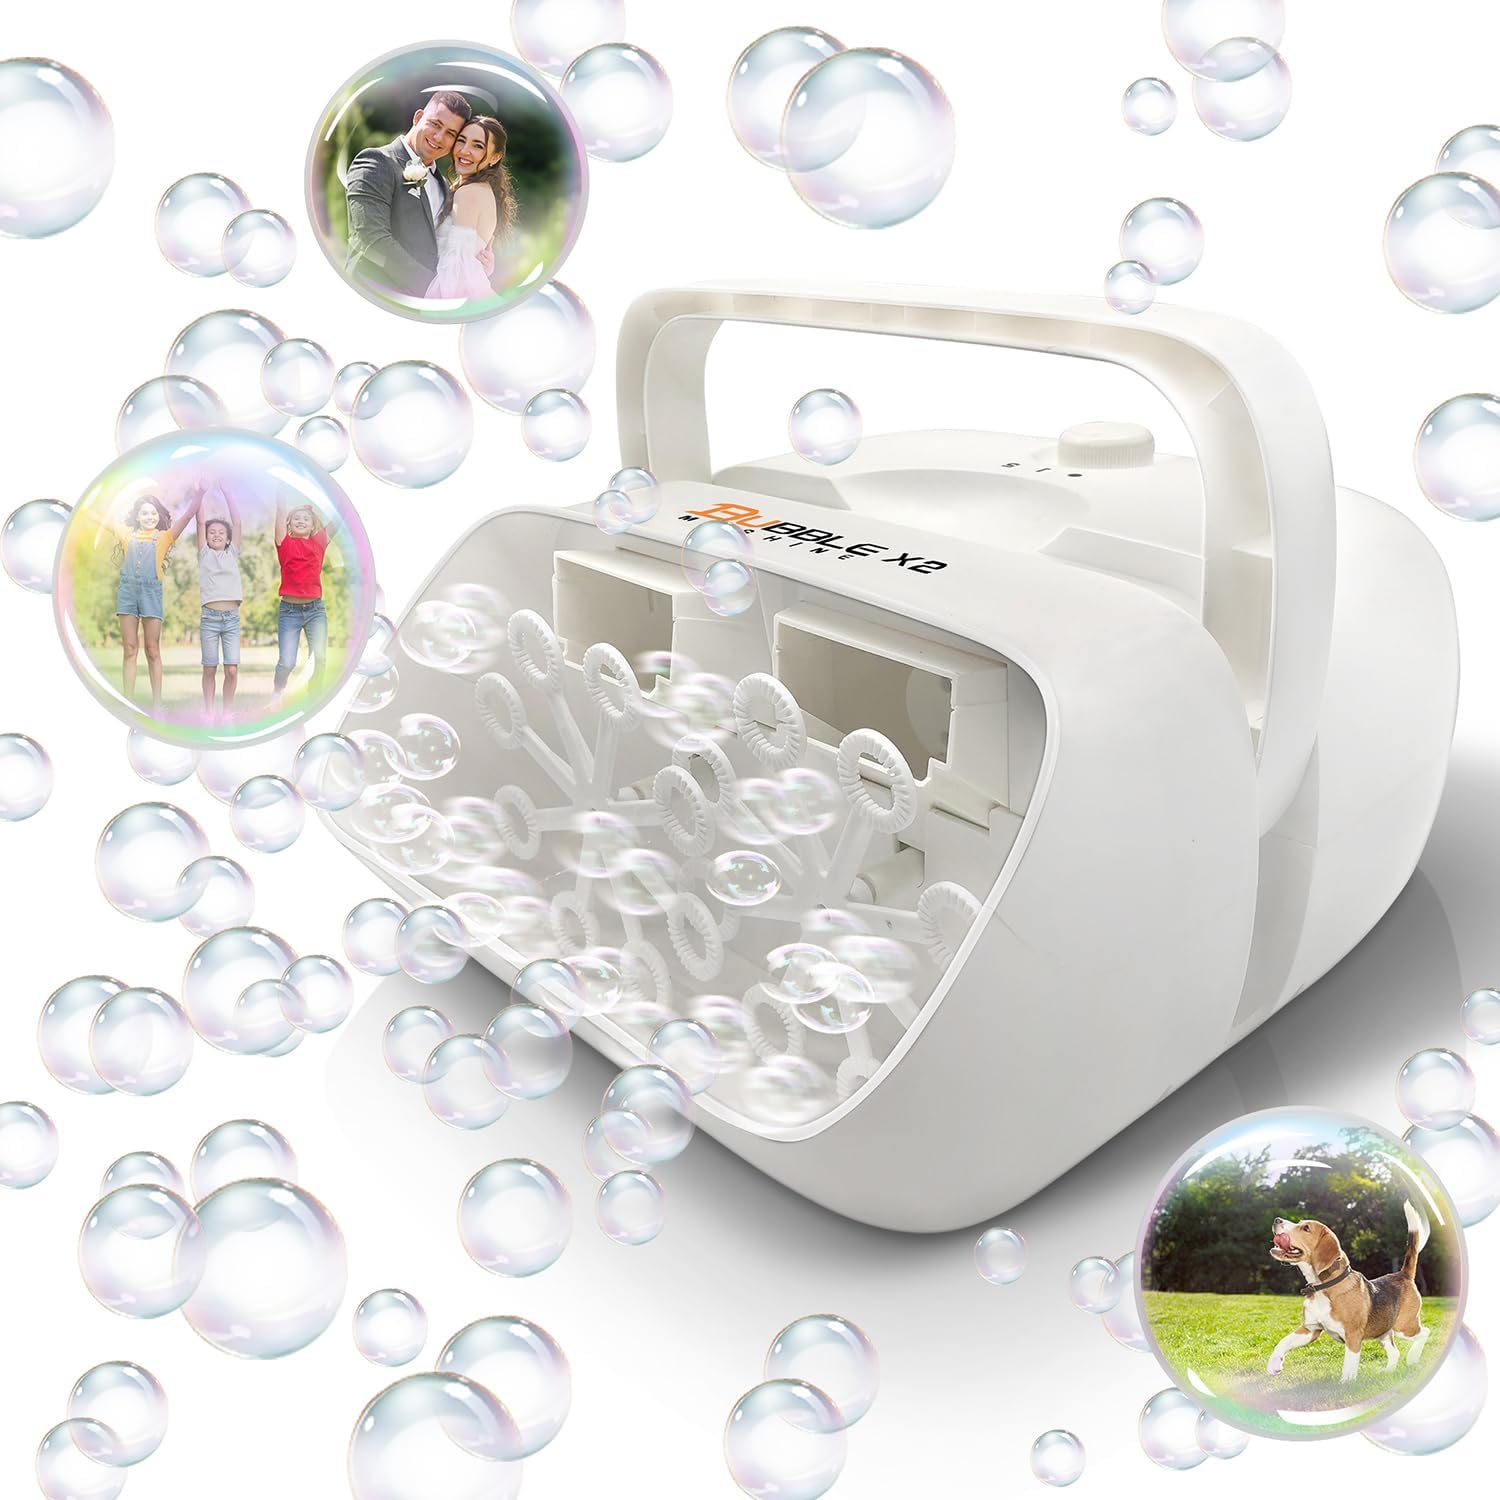 ArtCreativity Electric Bubble Machine for Kids with Concentrated Bubble Solution, Plug-in Automatic Bubble Machine, Blows Up to 8000 Bubbles Per Minute, Dual Fan Bubble Blower for Kids Party